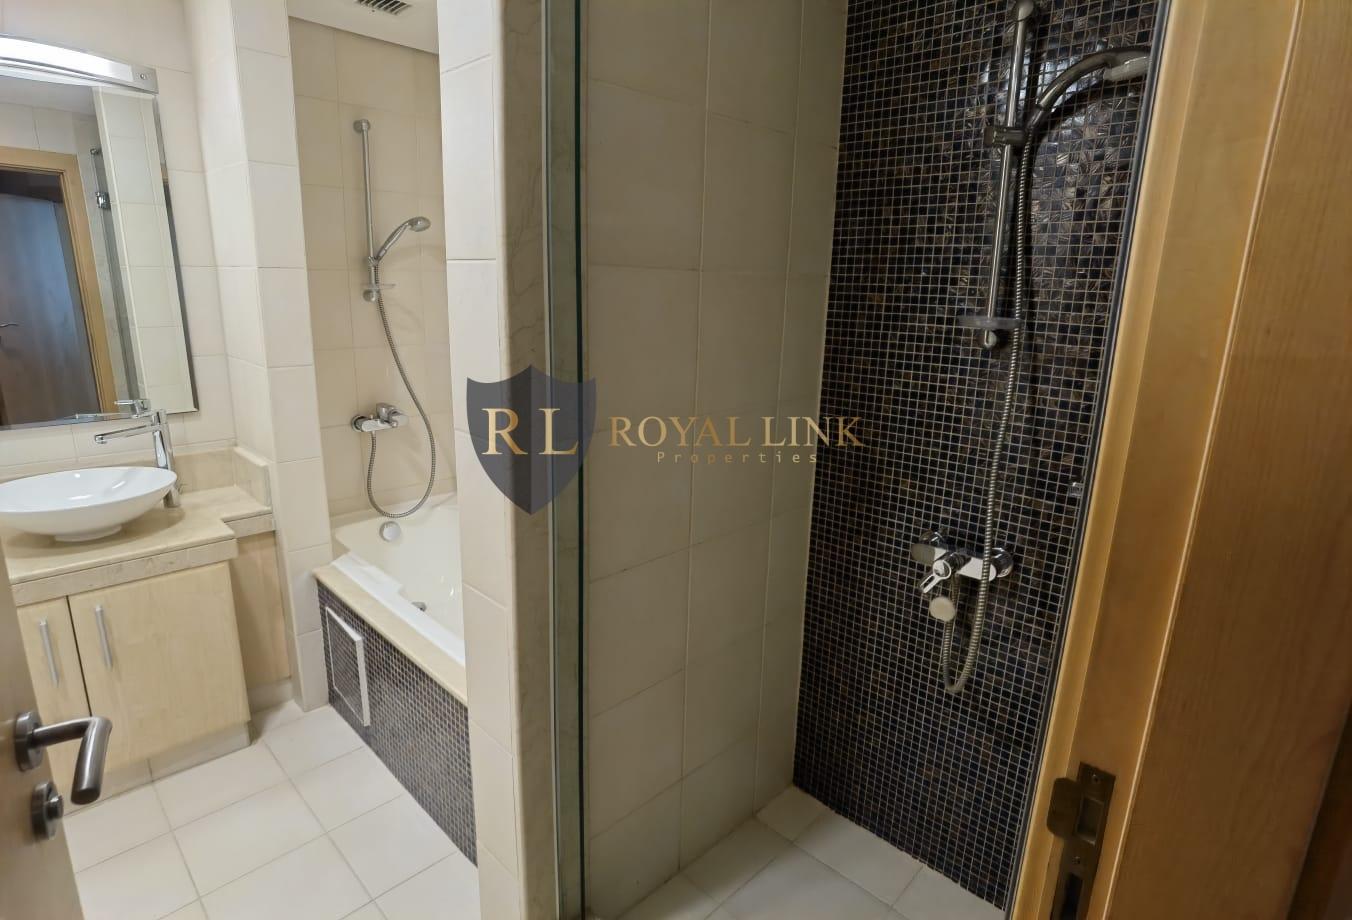 2 bed, 3 bath Apartment for rent in Al Das, Shoreline Apartments, Palm Jumeirah, Dubai for price AED 210000 yearly 